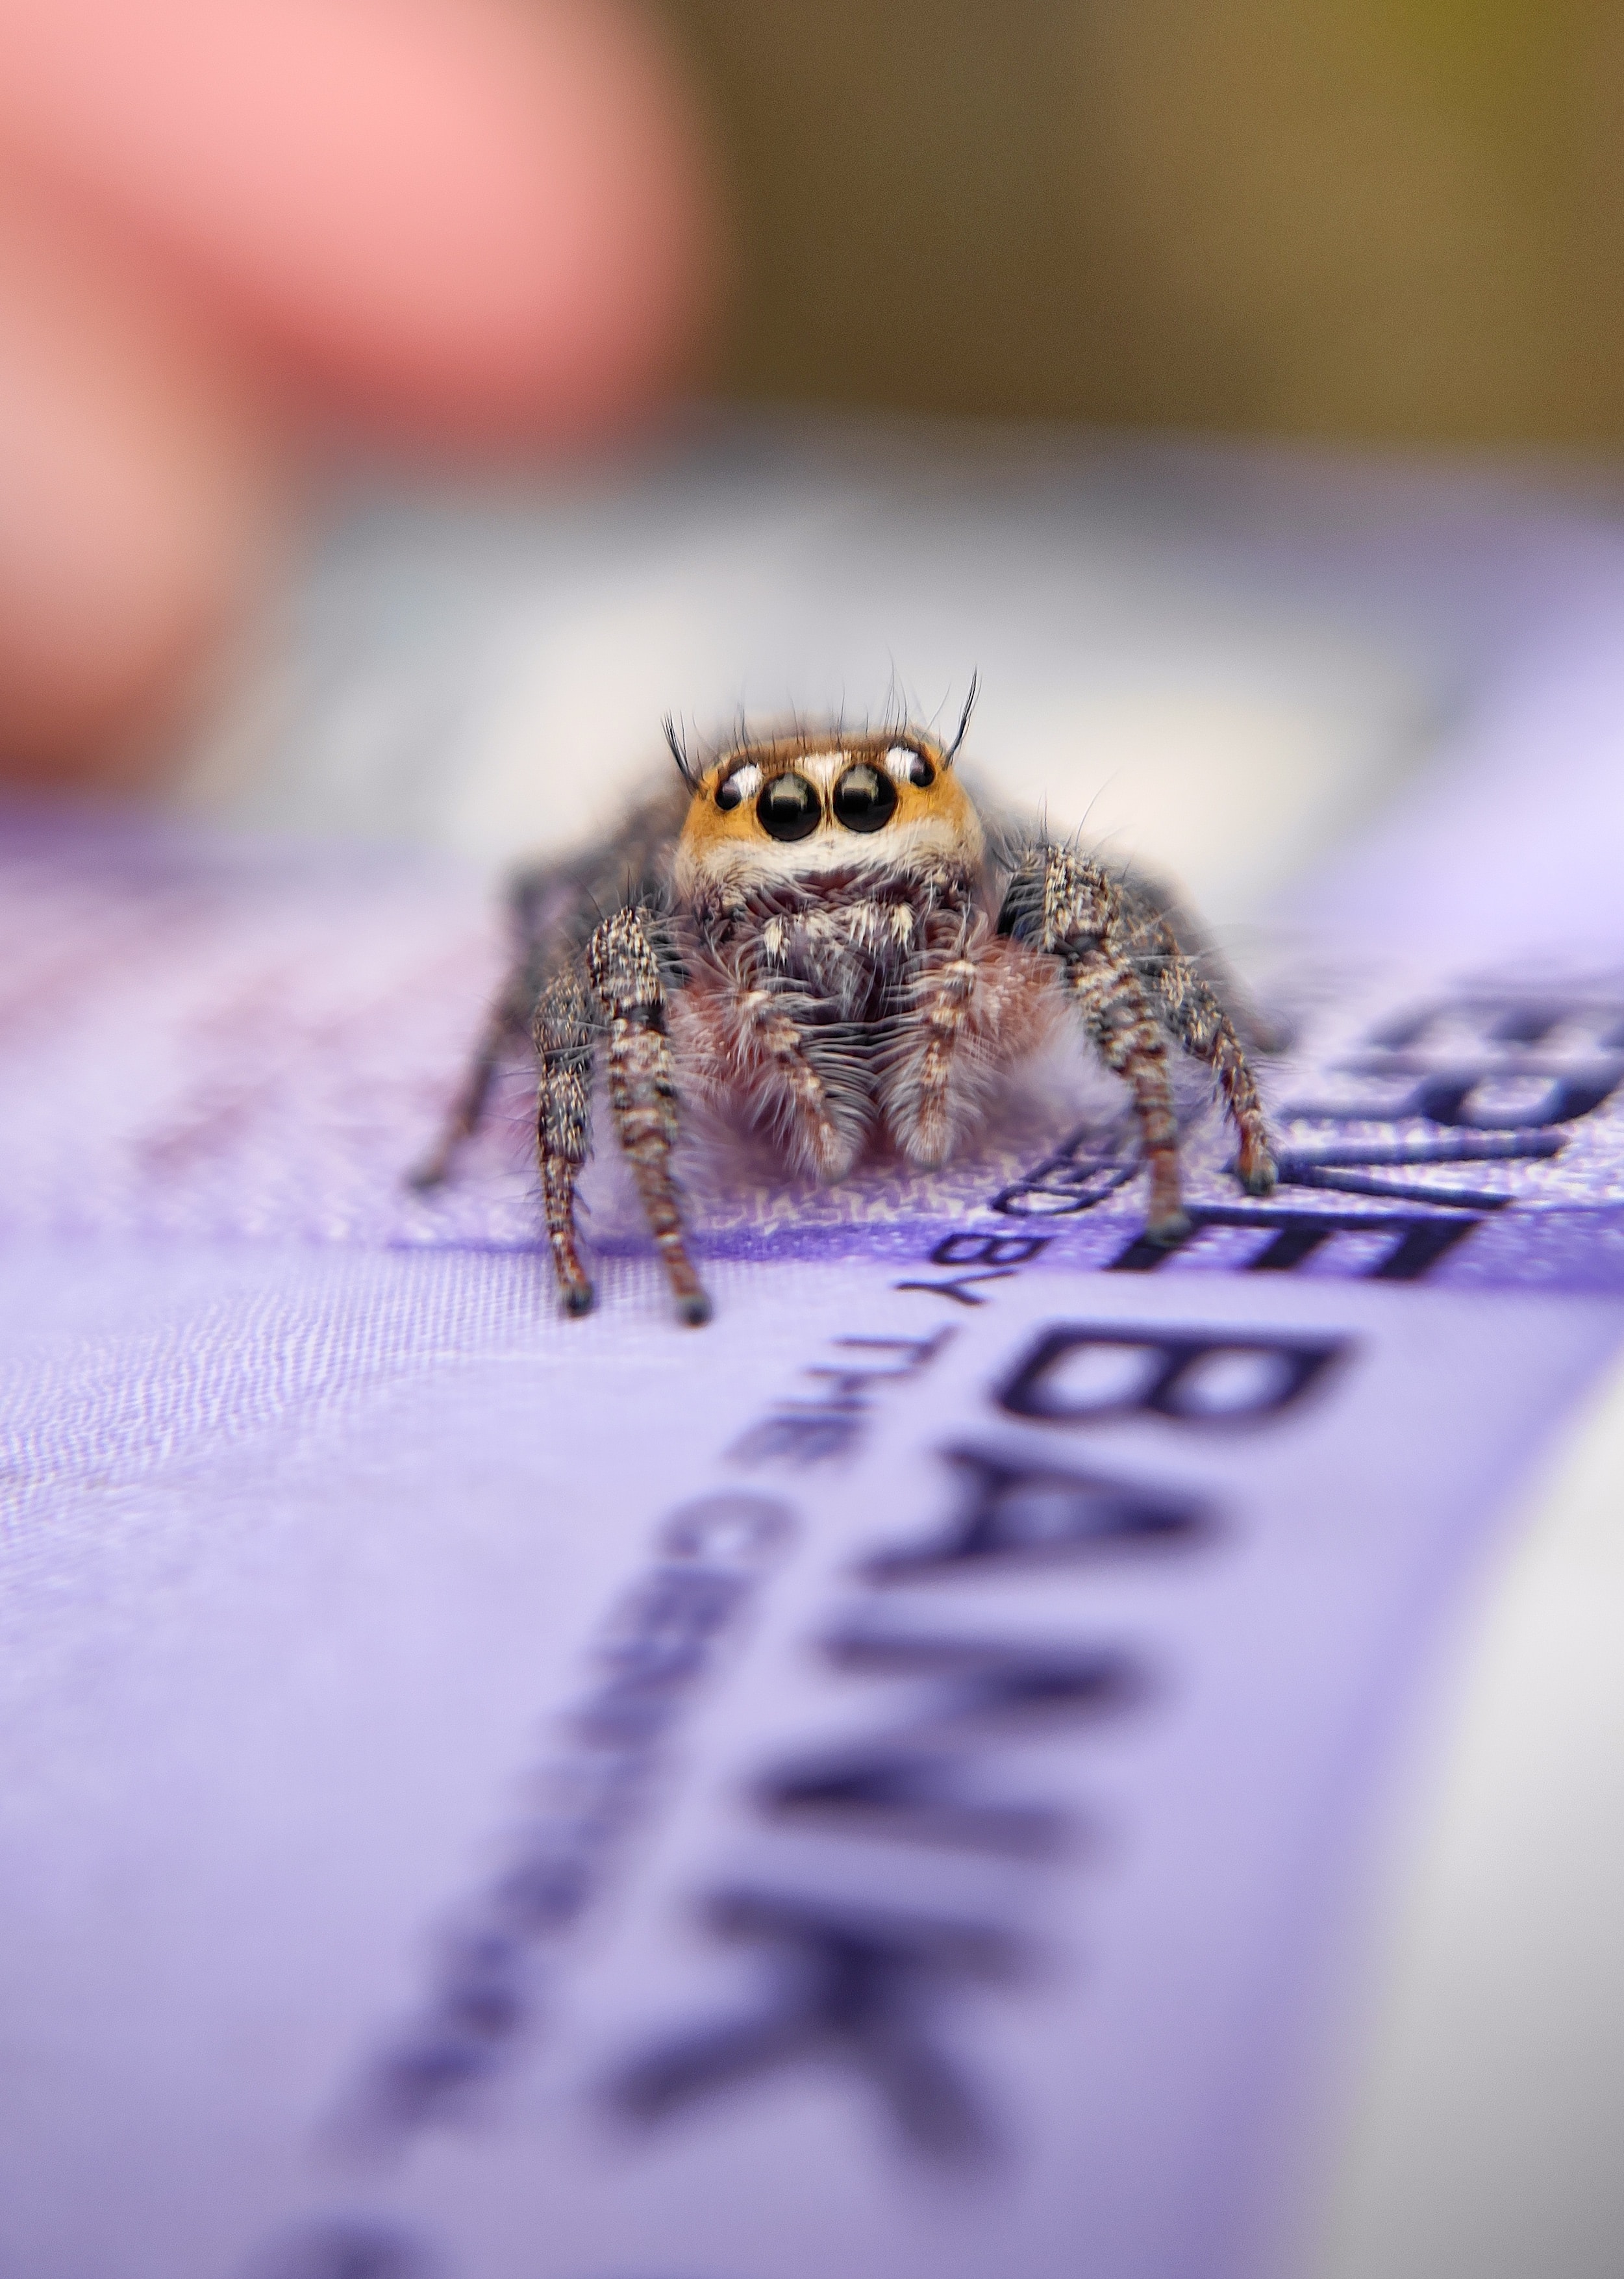 Jumping Spider Help and Advice